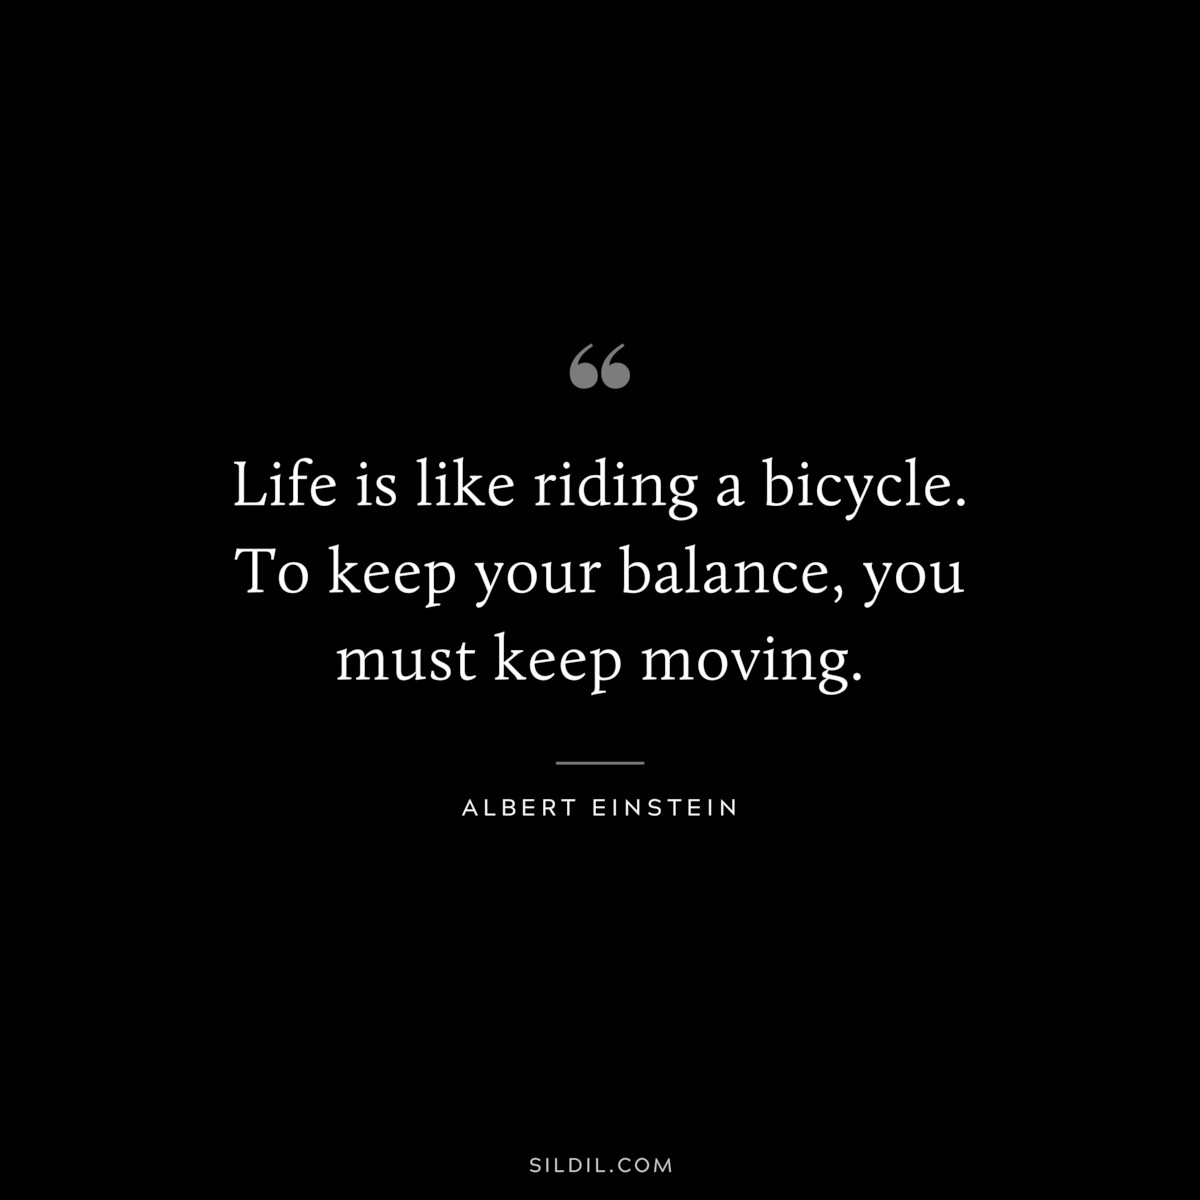 Life is like riding a bicycle. To keep your balance, you must keep moving. ― Albert Einstein